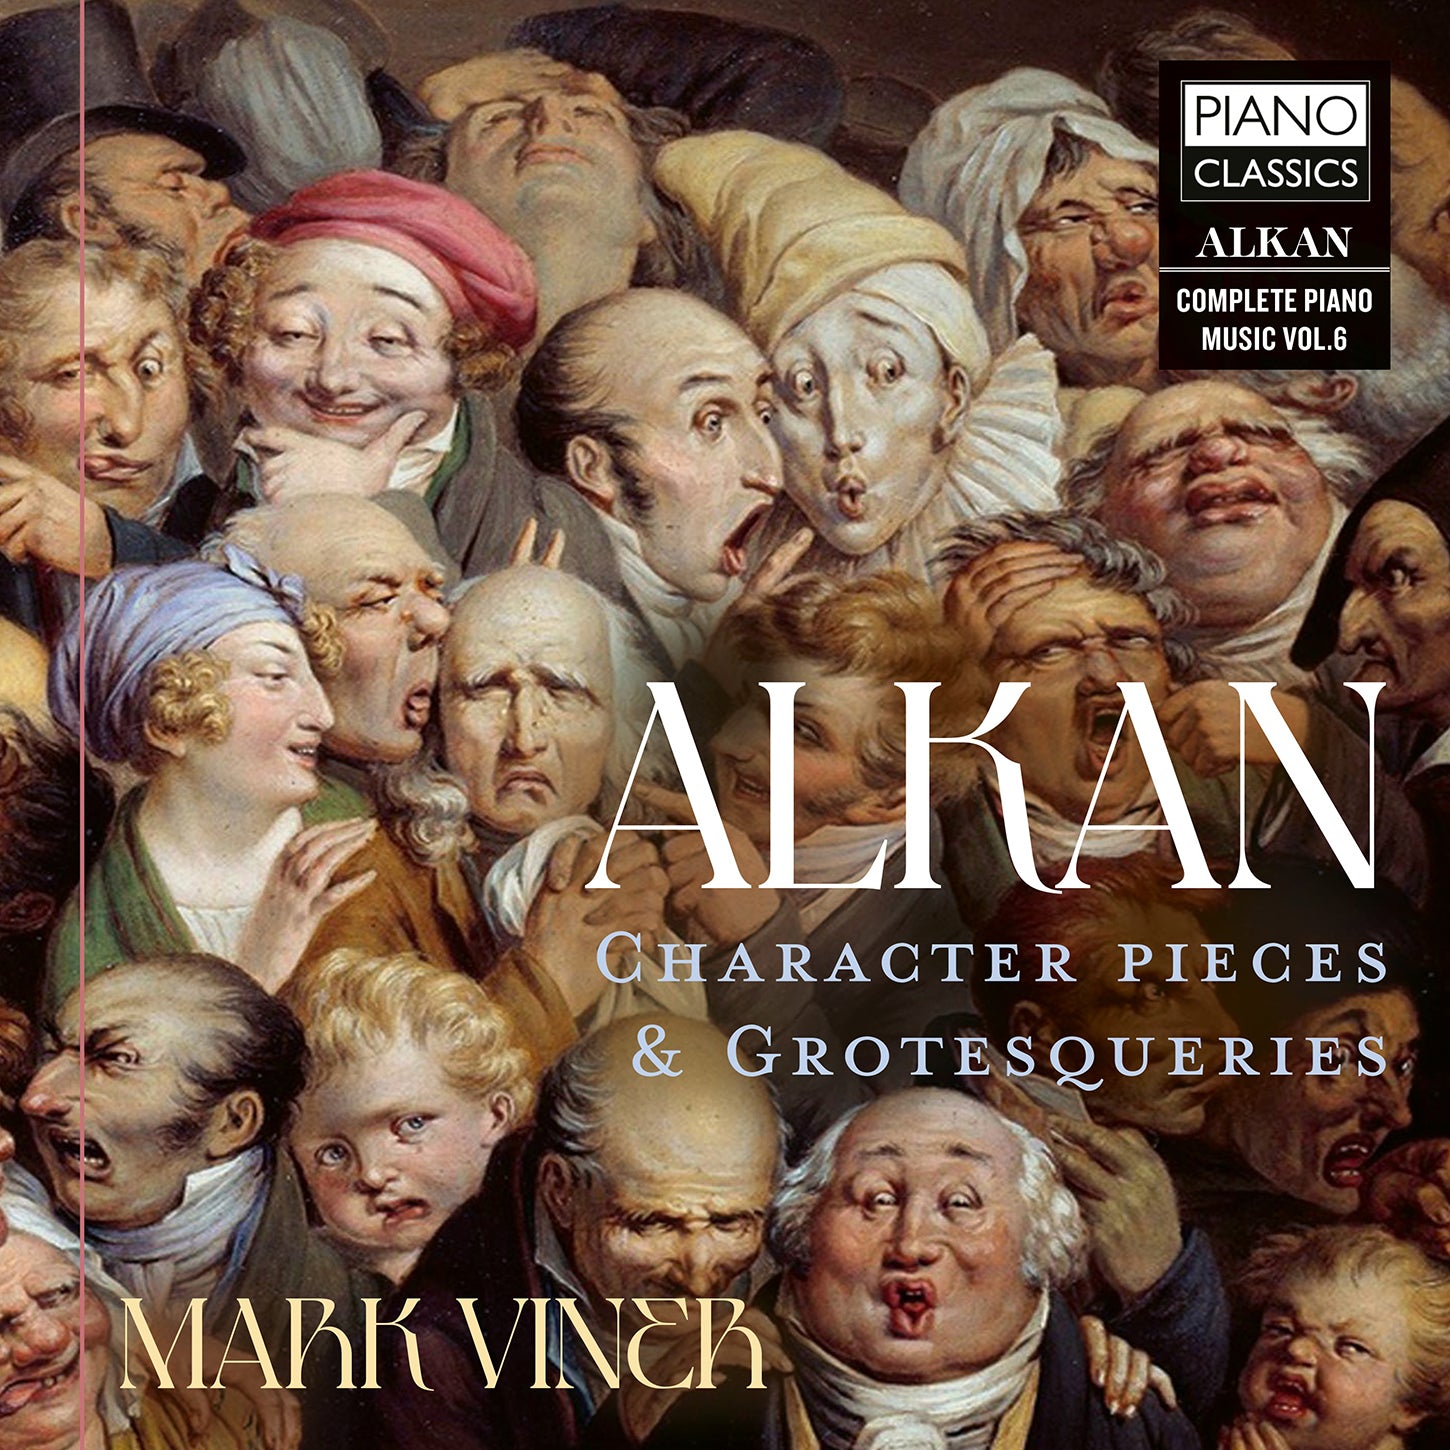 Alkan: Character Pieces & Grotesqueries / Viner